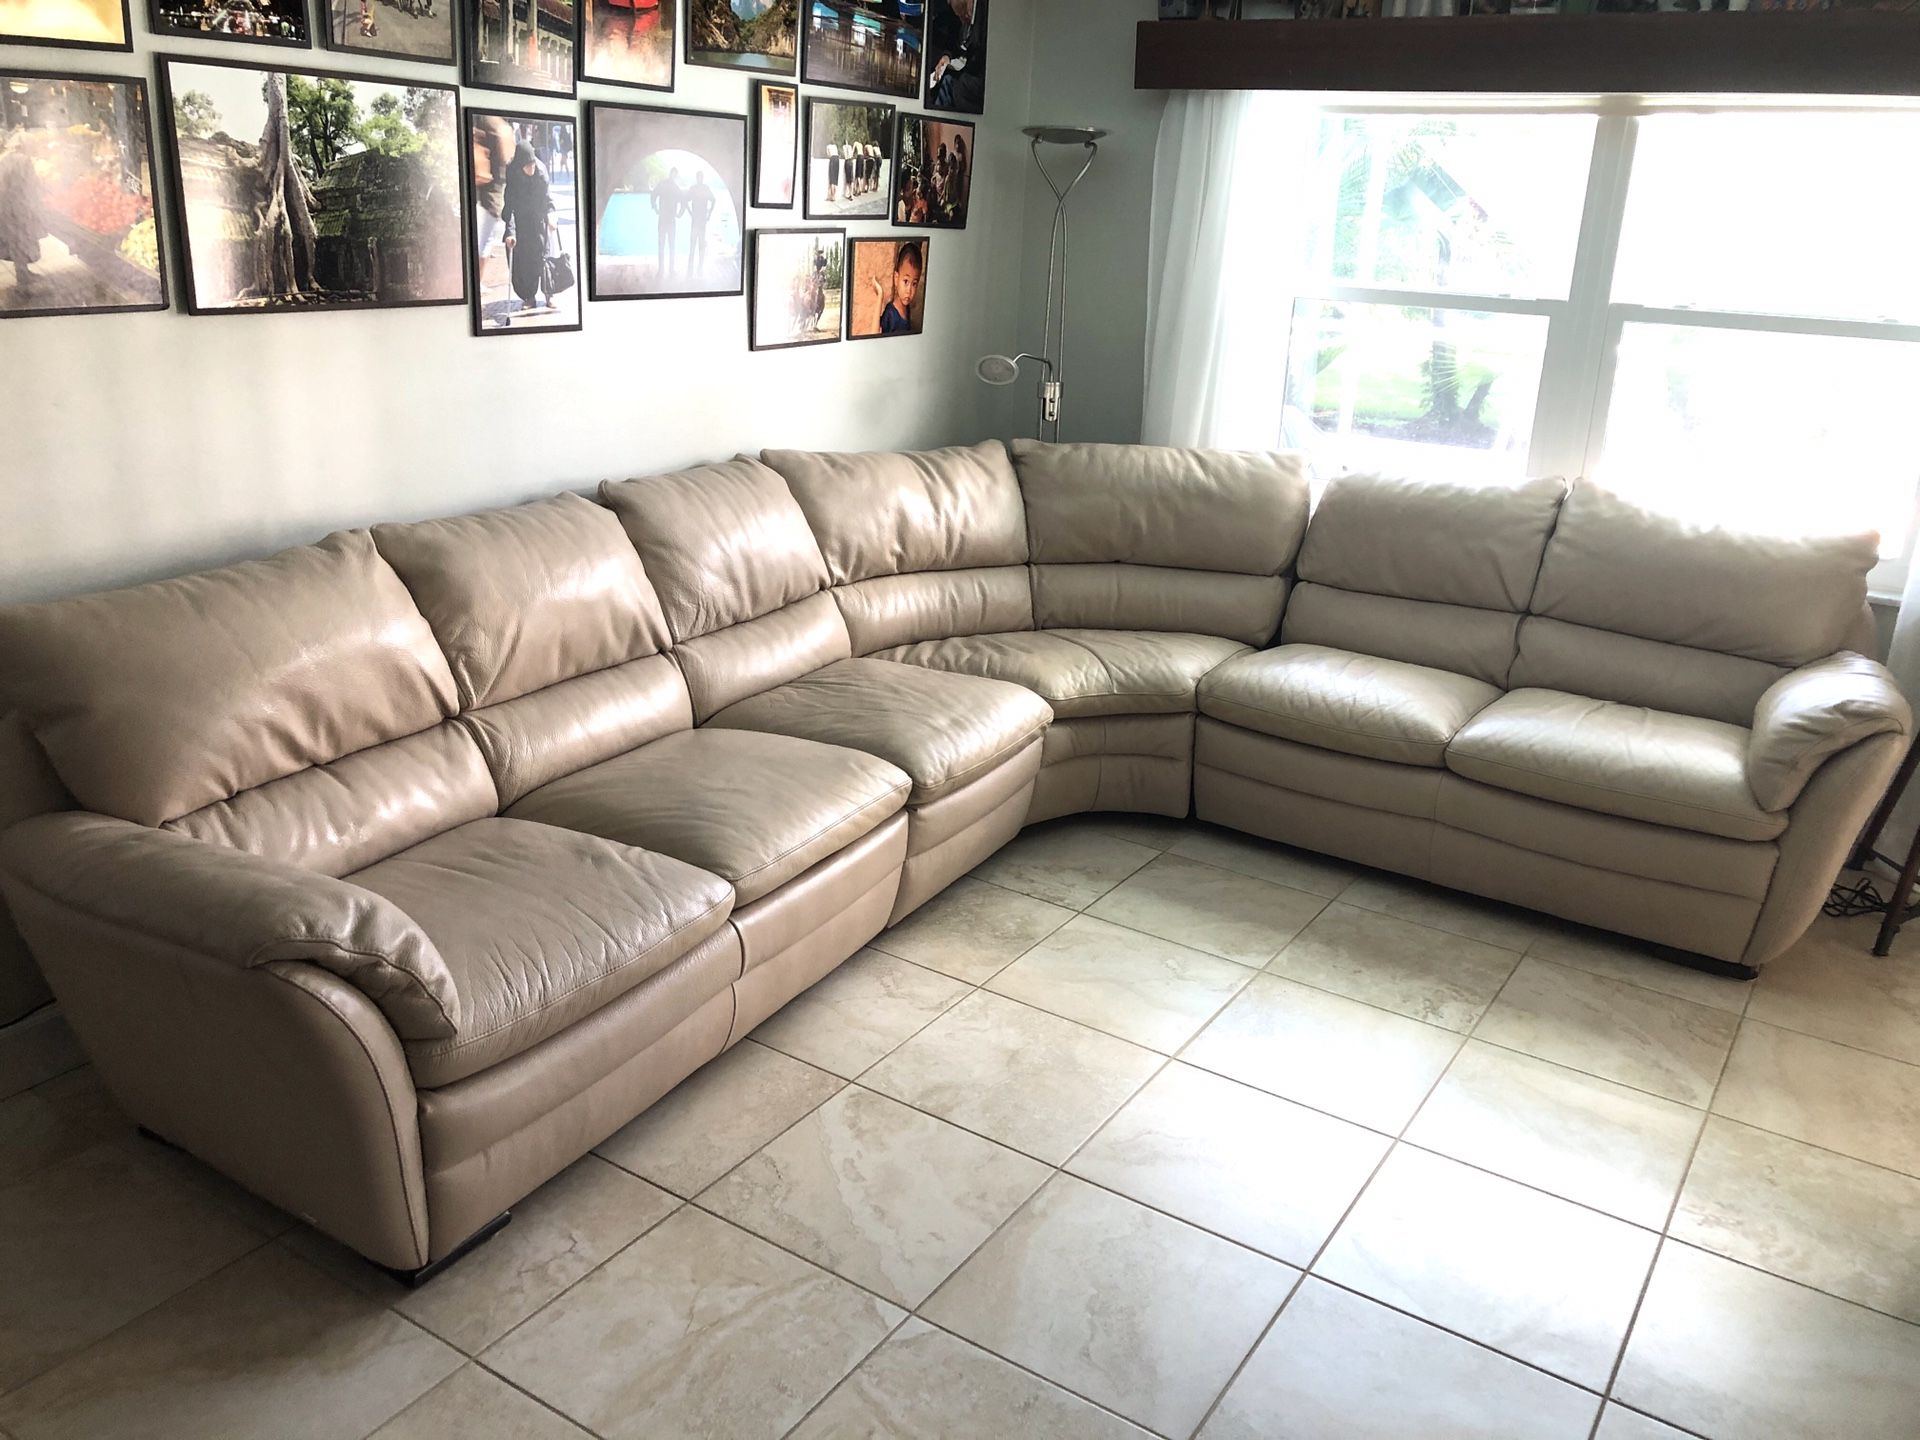 Couch. Natuzzi all leather...6 seat sectional...will sale for $750 or best offer...paid $3800. Will deliver!!!